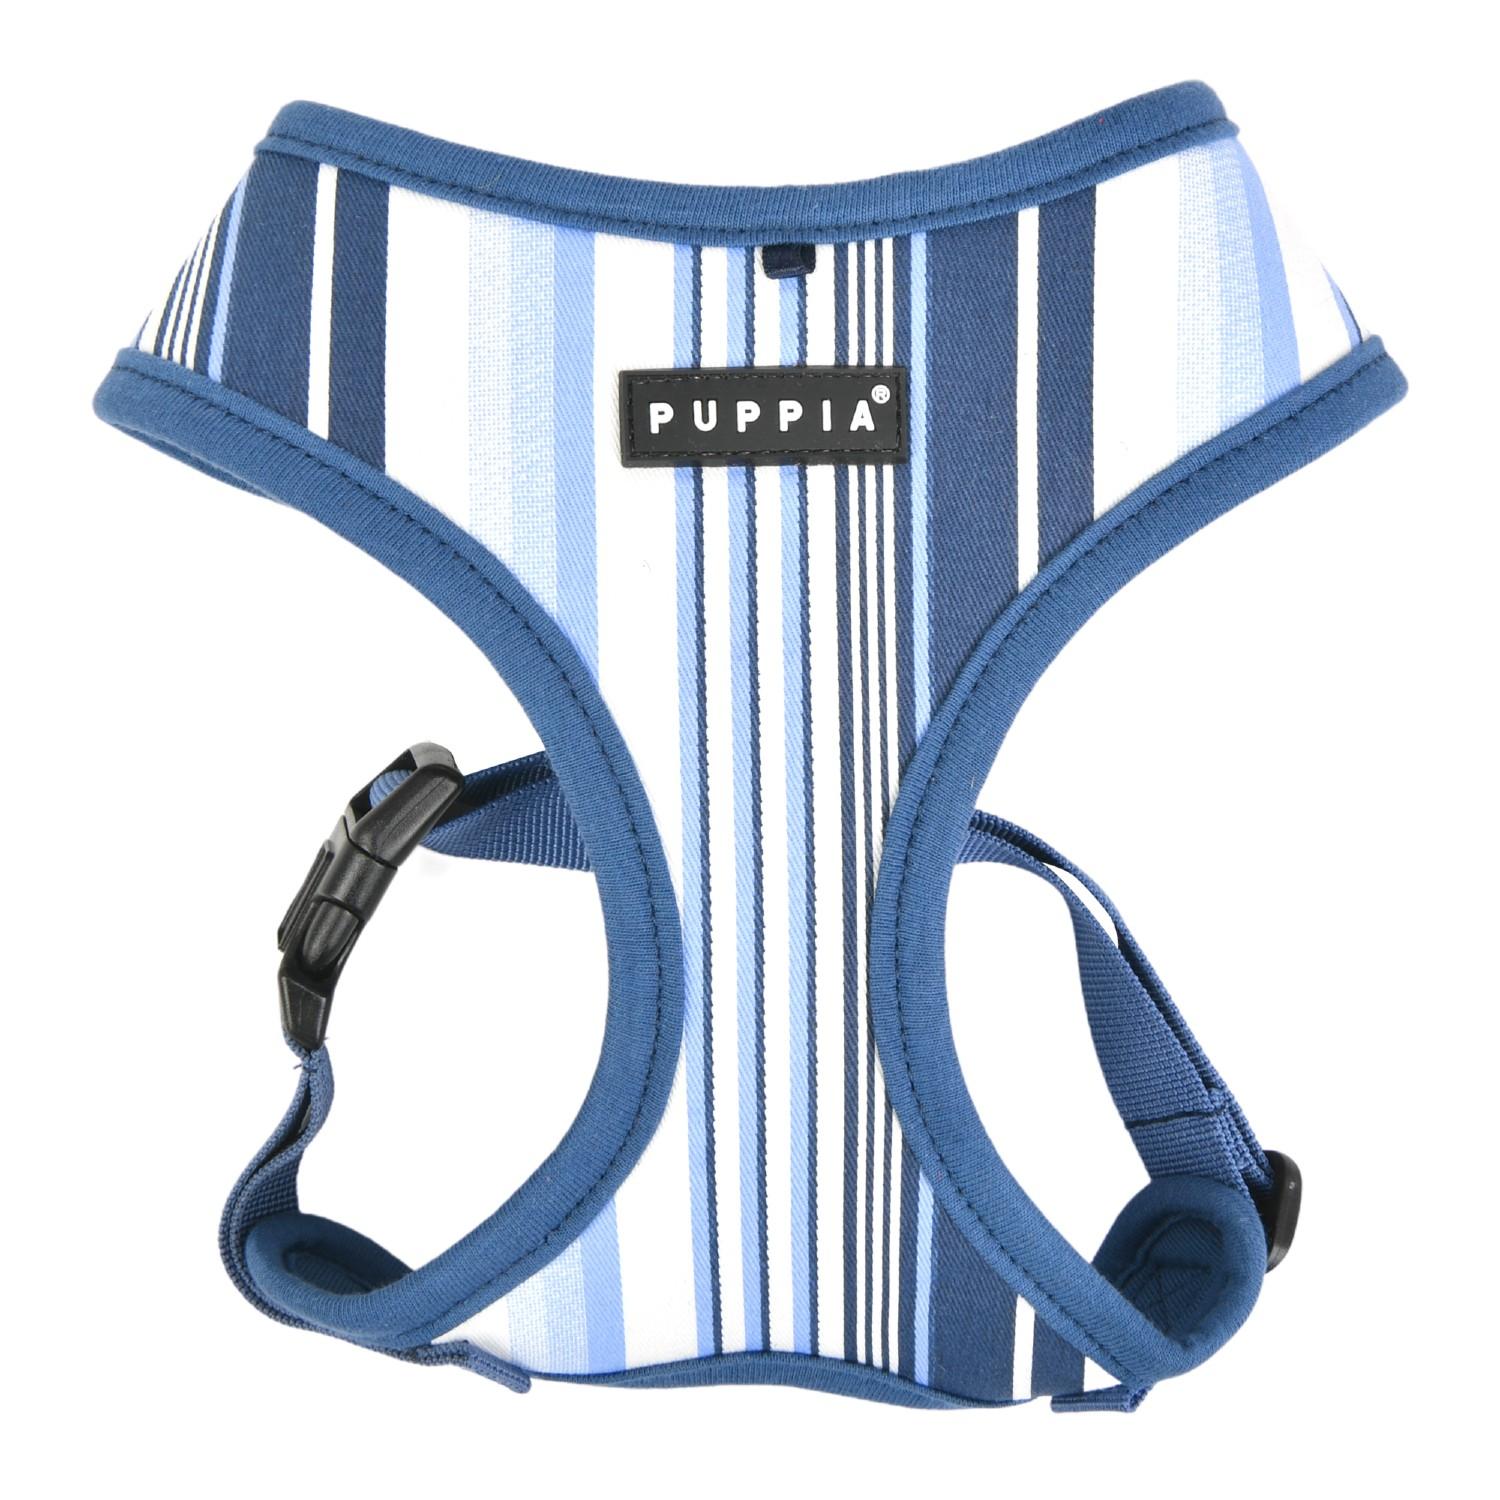 Caiden Adjustable Dog Harness by Puppia - Blue